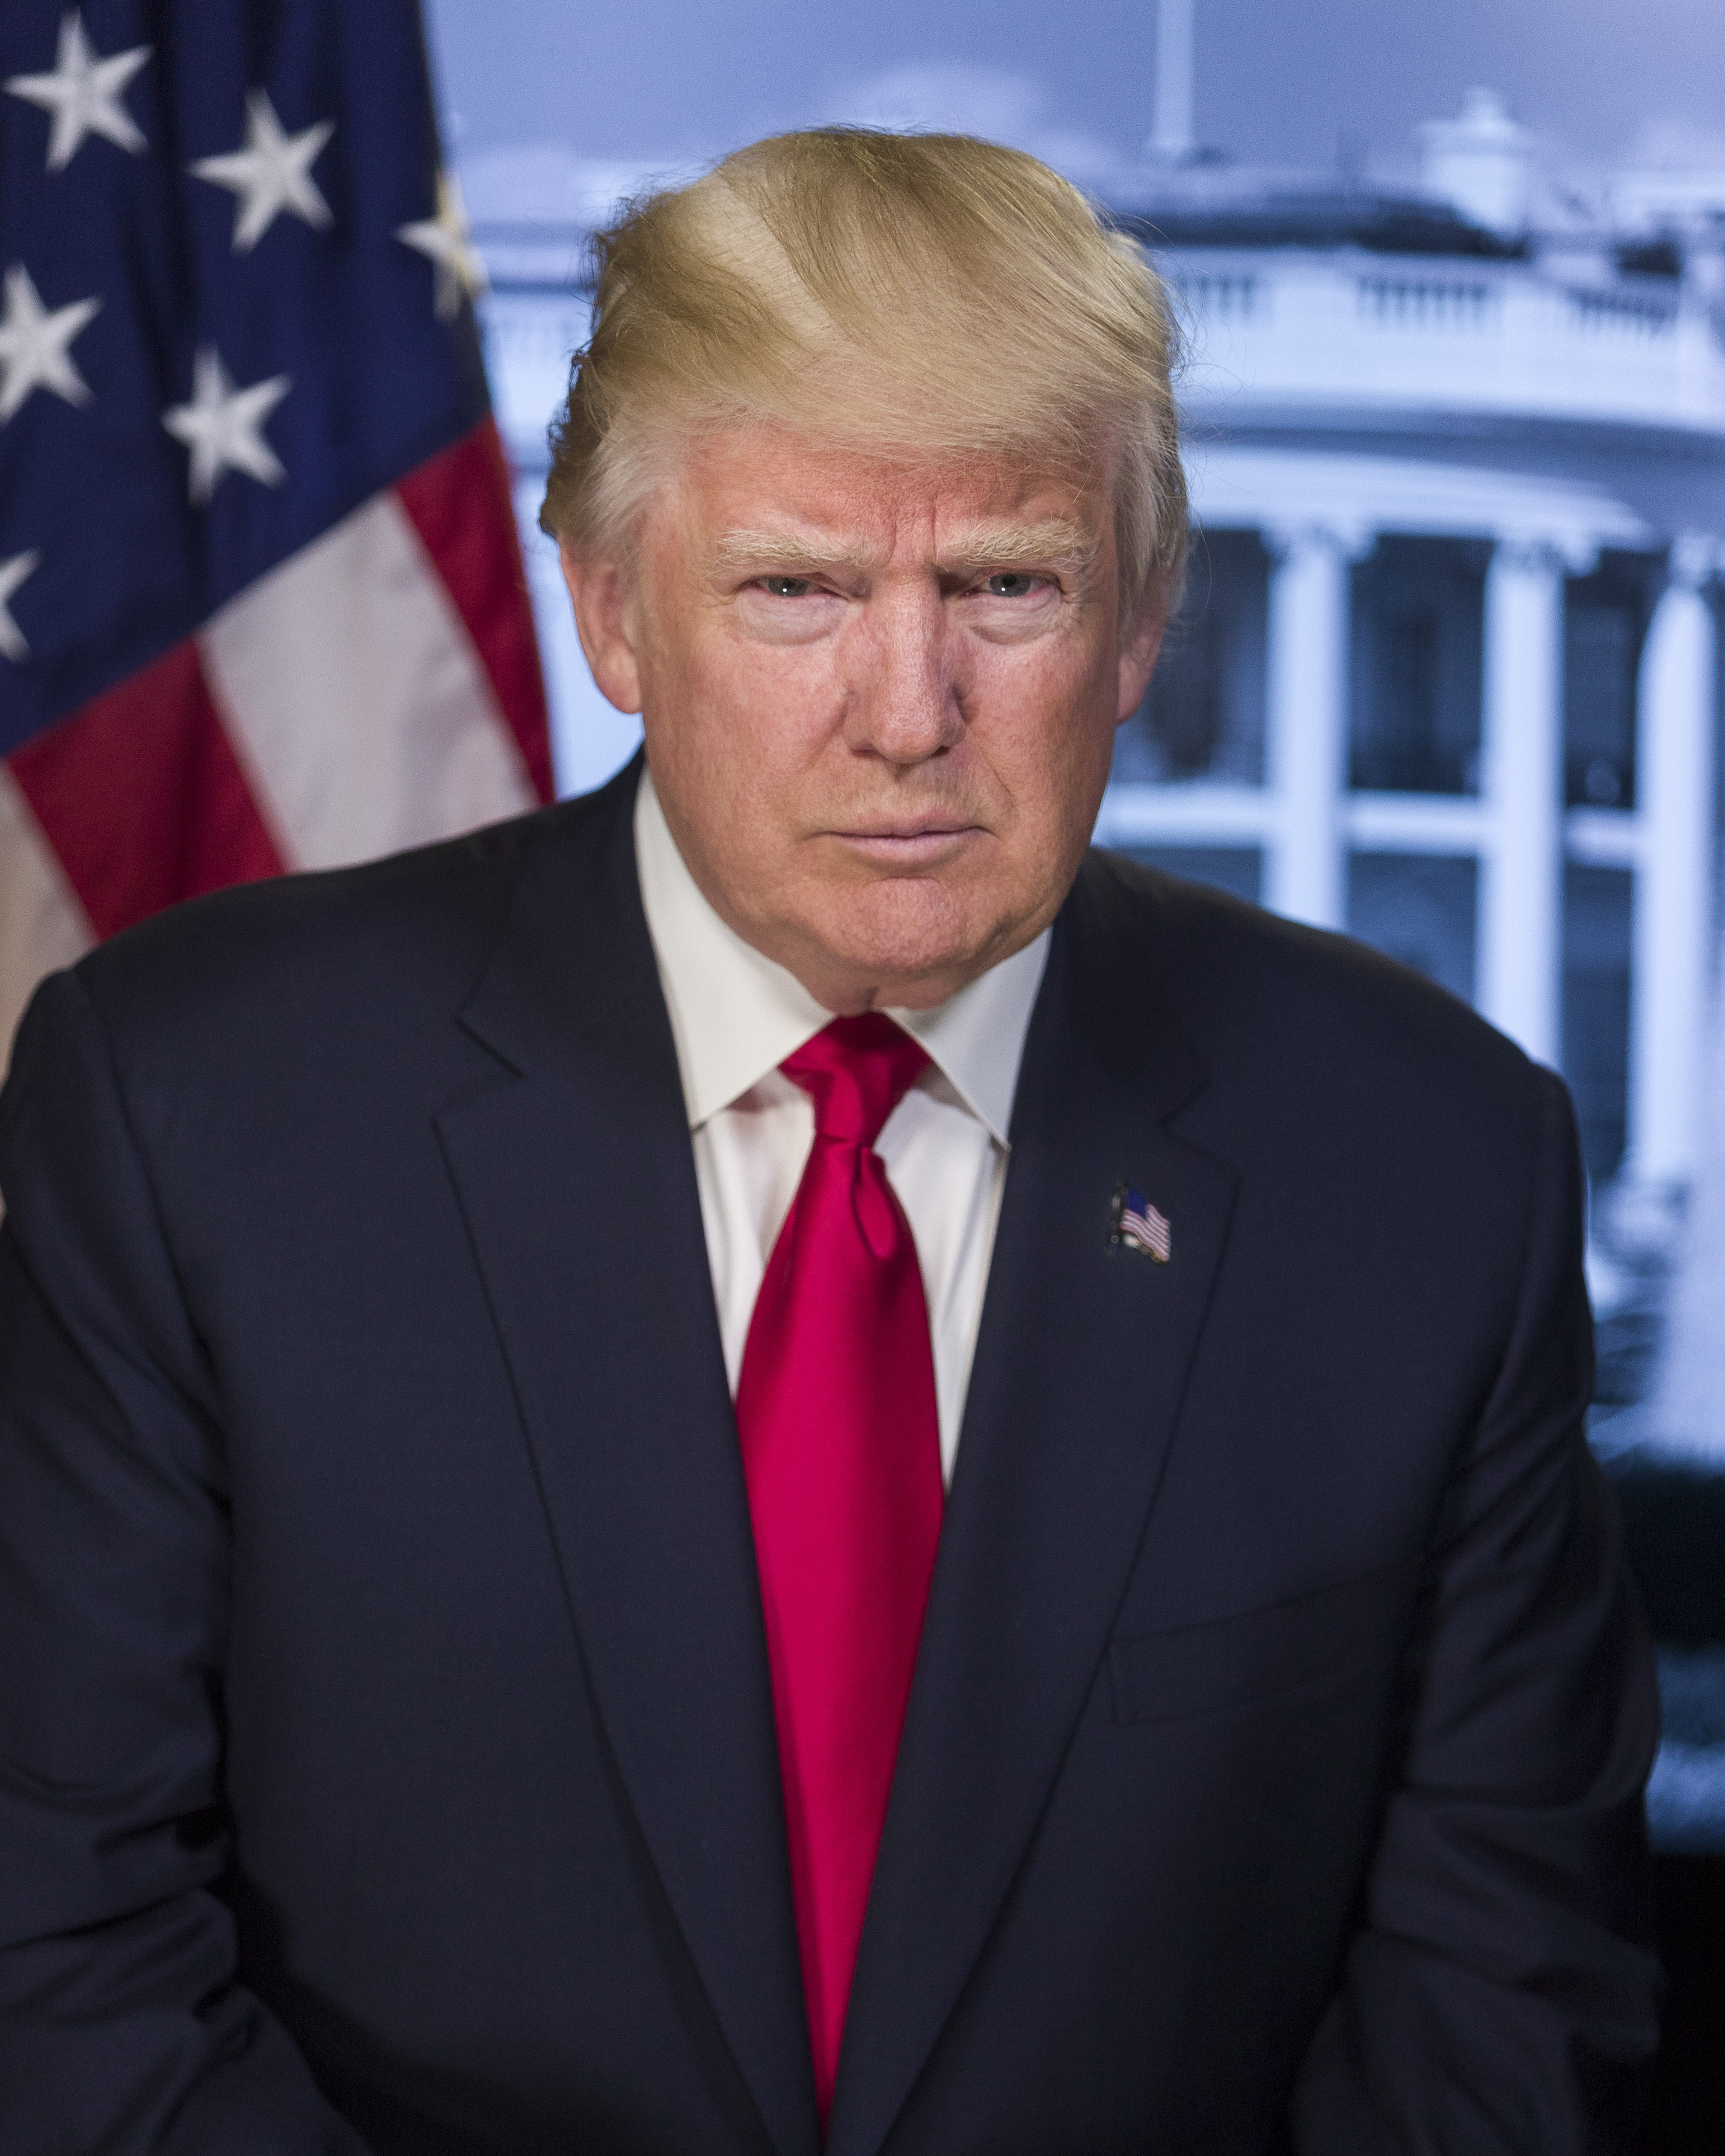 Donald Trump. the 45<sup>th</sup> President of the United States of America